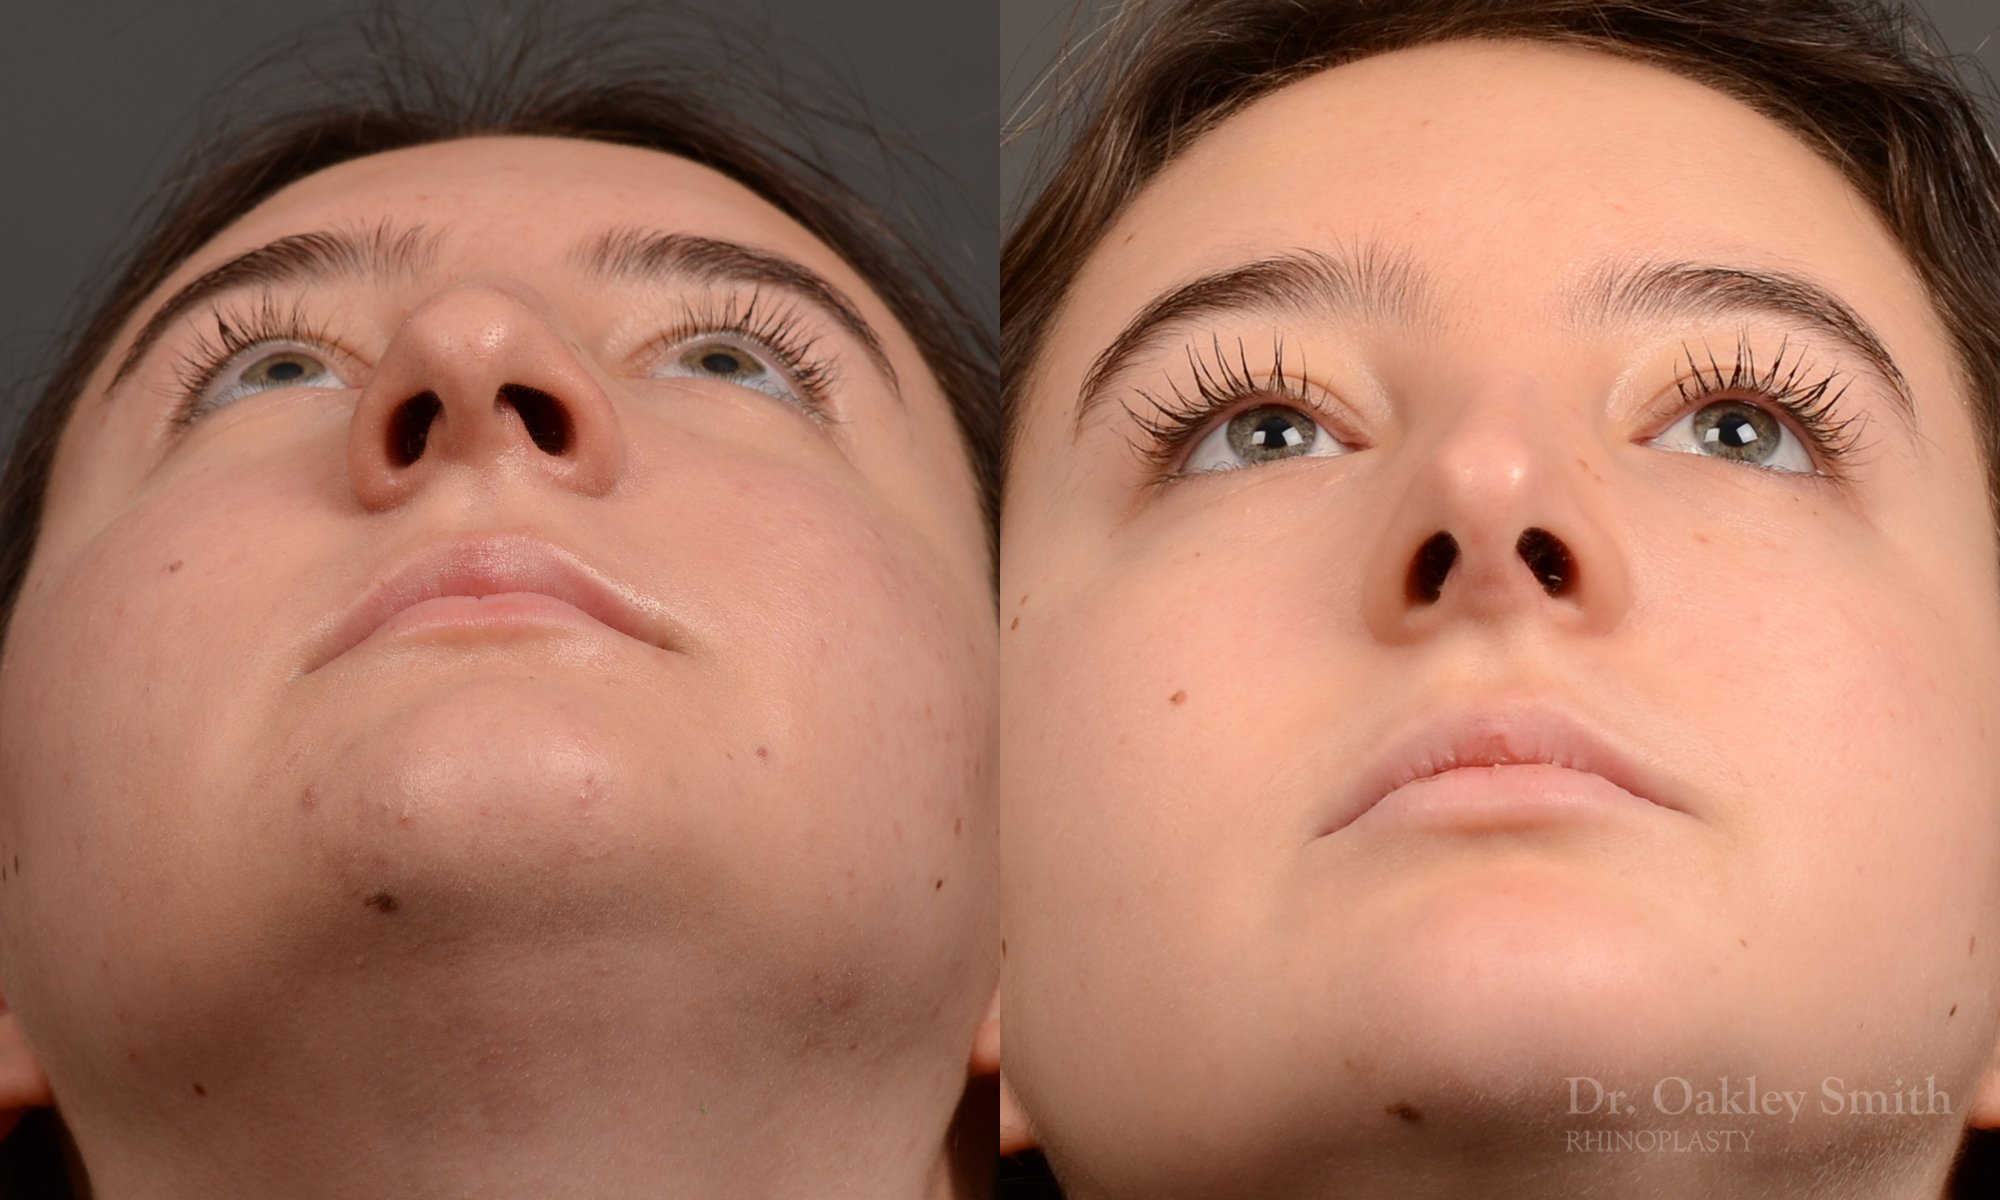 Rhinoplasty - Rhinoplasty Before and After – Case 467